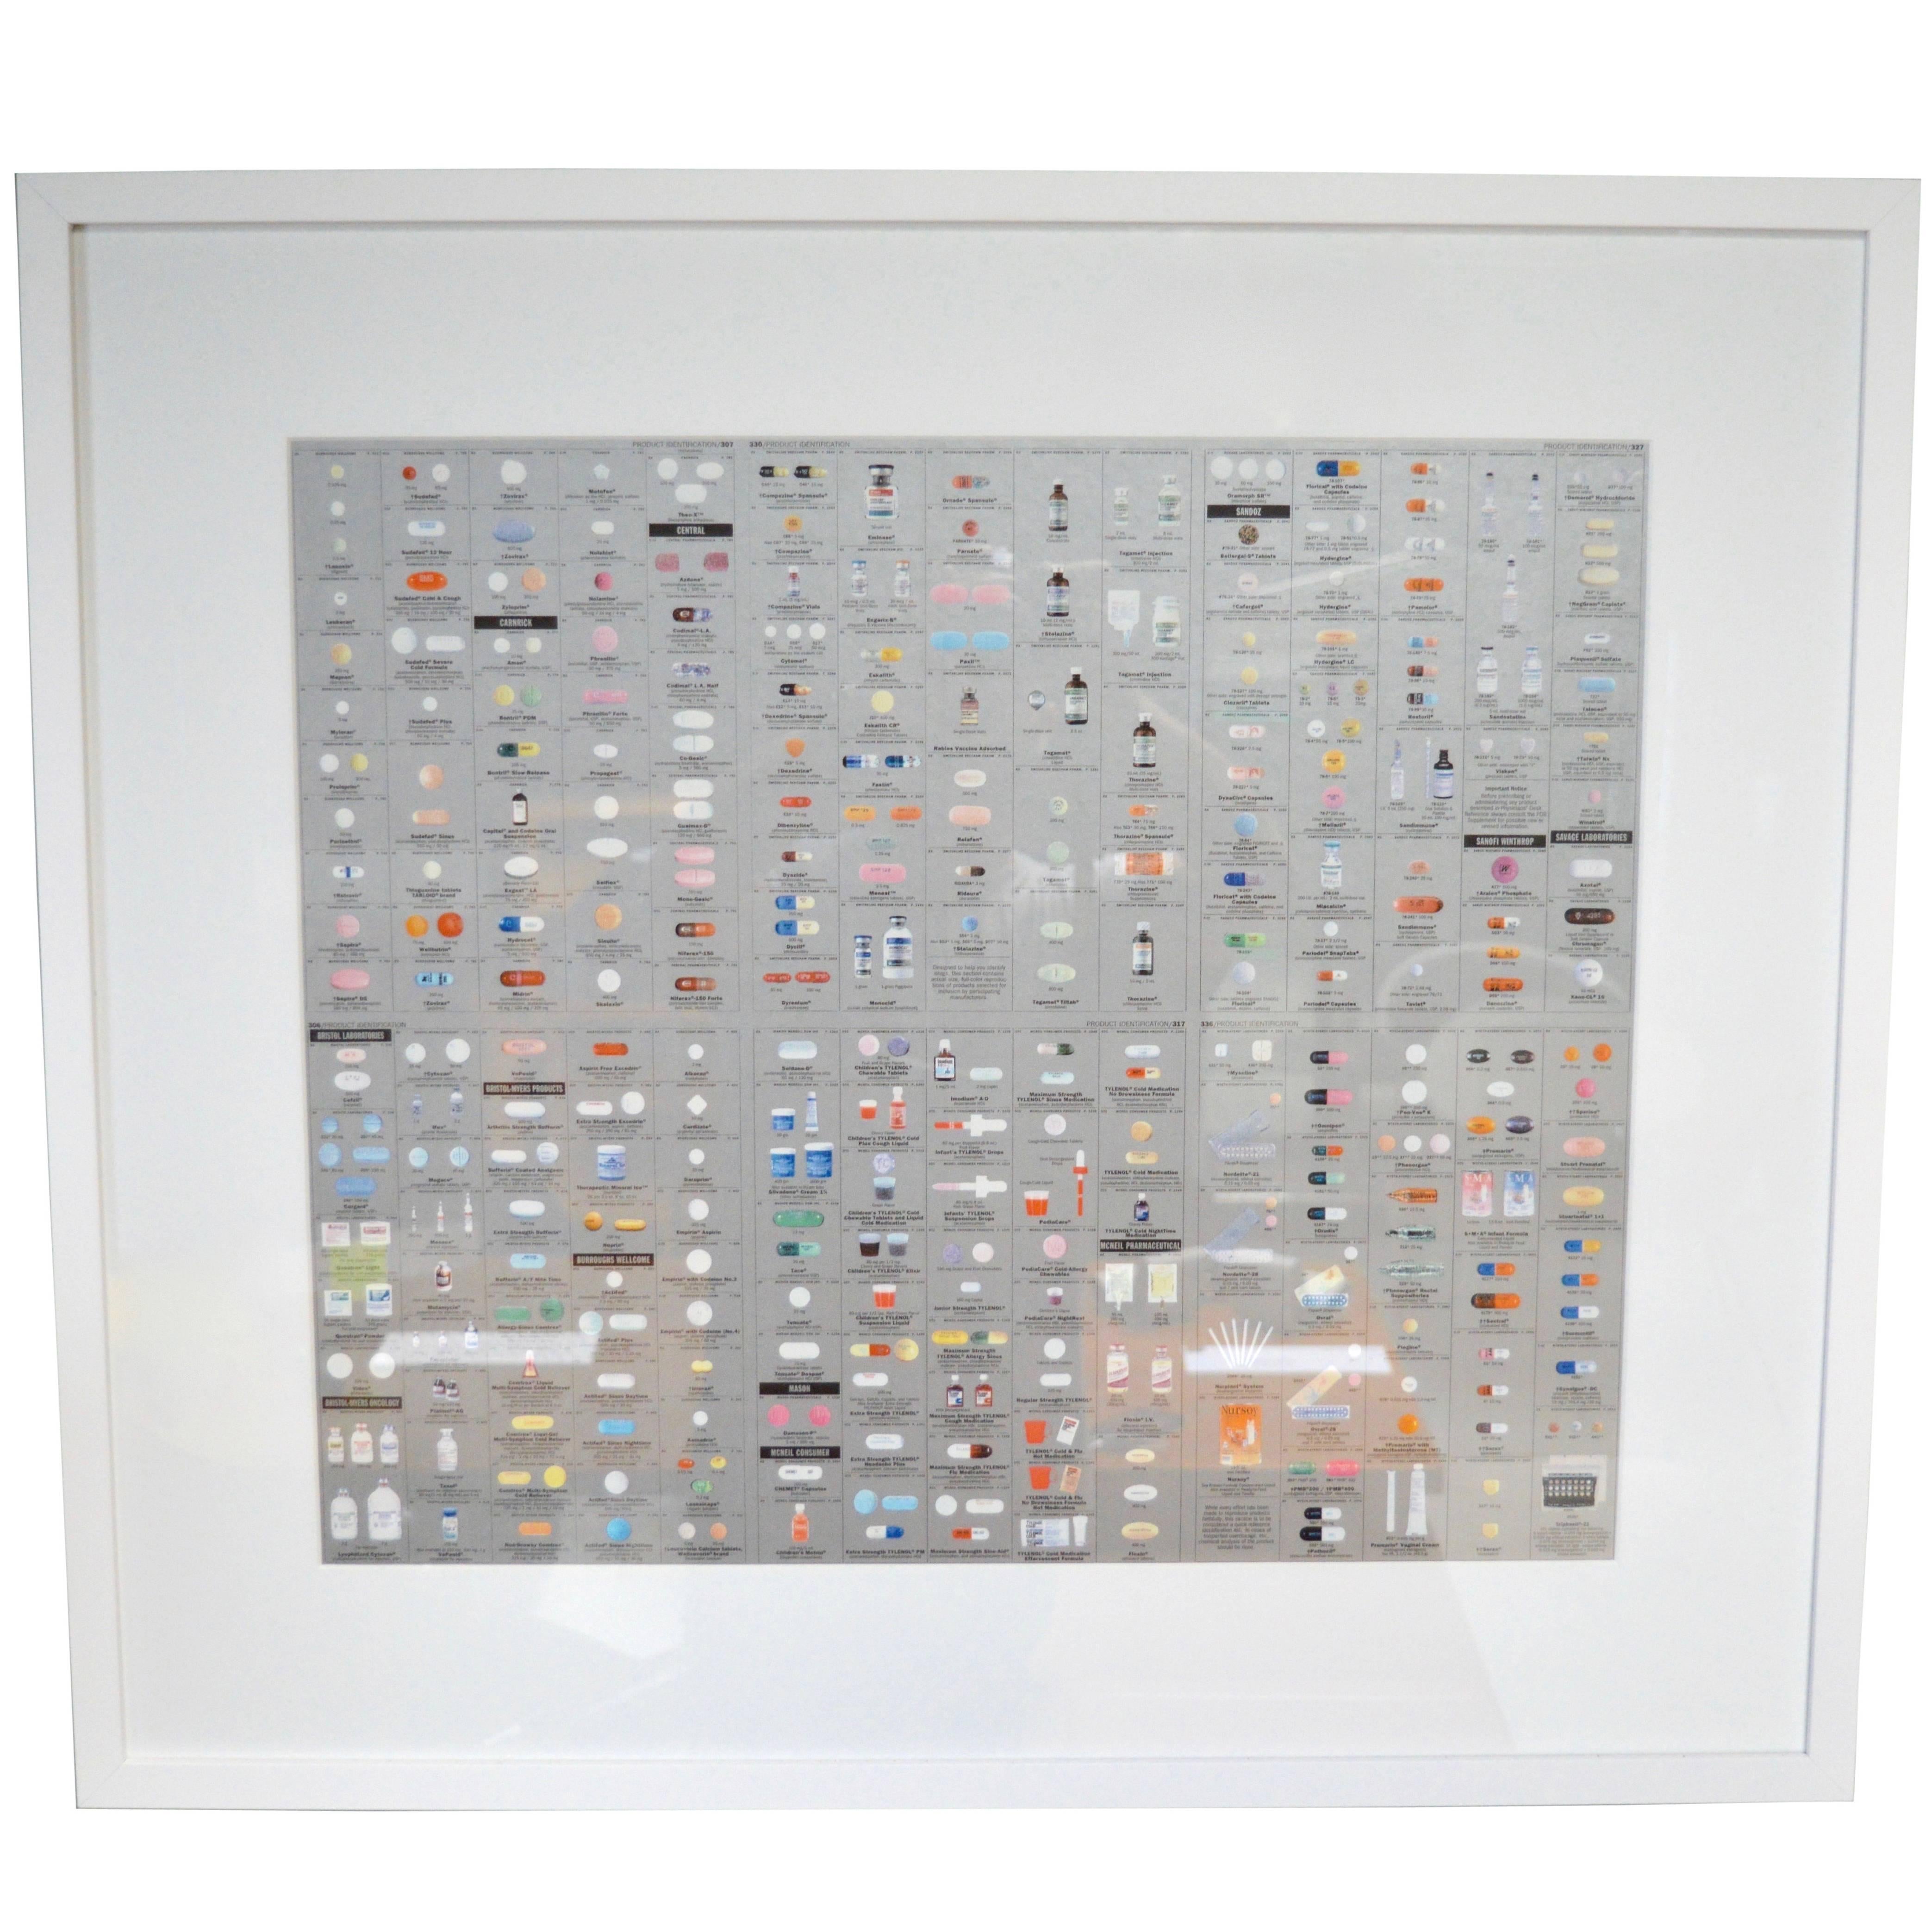 Pharmacy themed wallpaper by Damien Hirst. Wallpaper depicts pills, pill bottles and prescription names. Perfect vintage condition. Newly framed and matted in white with glass. Bronze and silver panels available. Priced individually. 

Actual